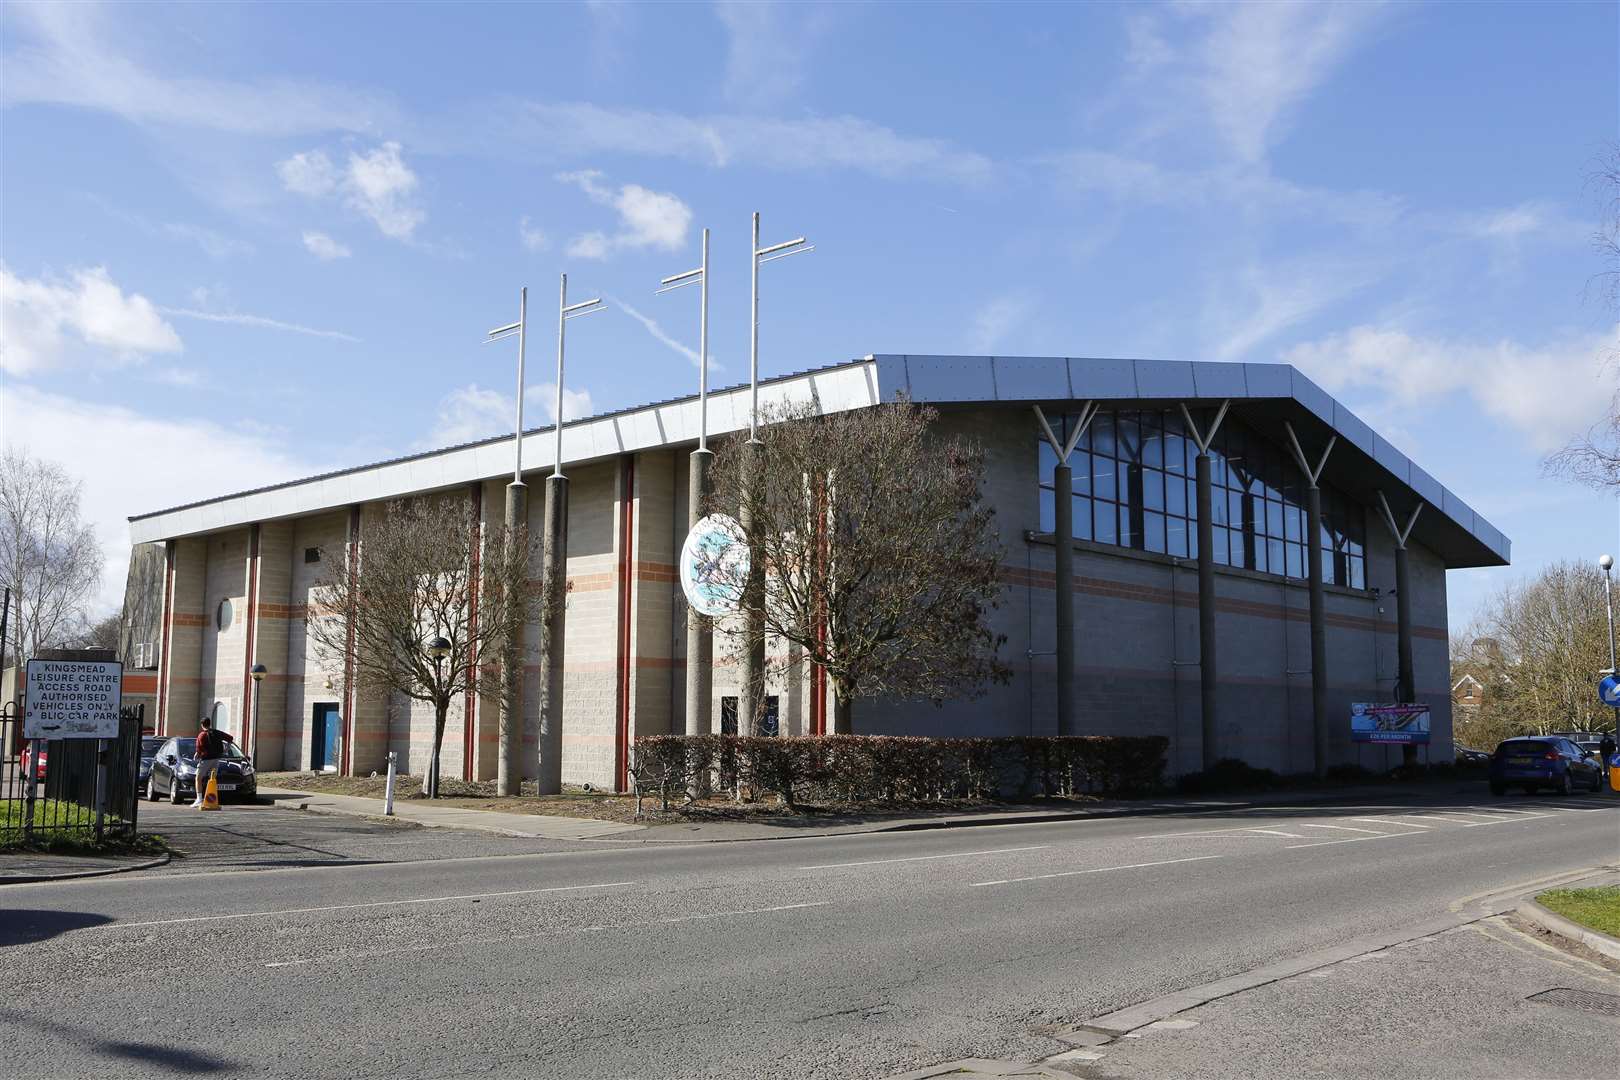 Proposals to increase parking fees at Kingsmead Leisure Centre in Canterbury have been revealed